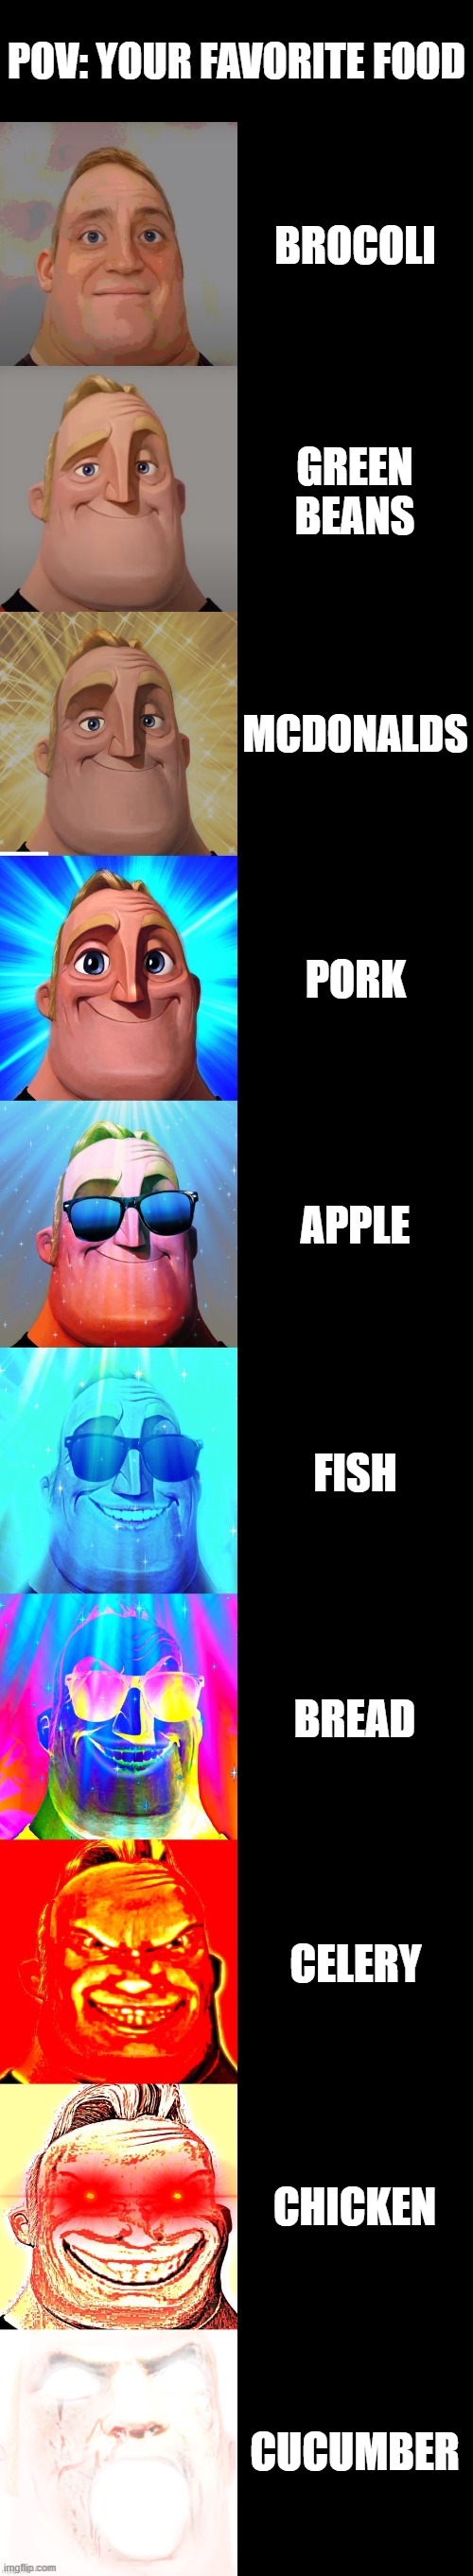 Mr incredible becoming canny: your favorite food | POV: YOUR FAVORITE FOOD; BROCOLI; GREEN BEANS; MCDONALDS; PORK; APPLE; FISH; BREAD; CELERY; CHICKEN; CUCUMBER | image tagged in mr incredible becoming canny | made w/ Imgflip meme maker